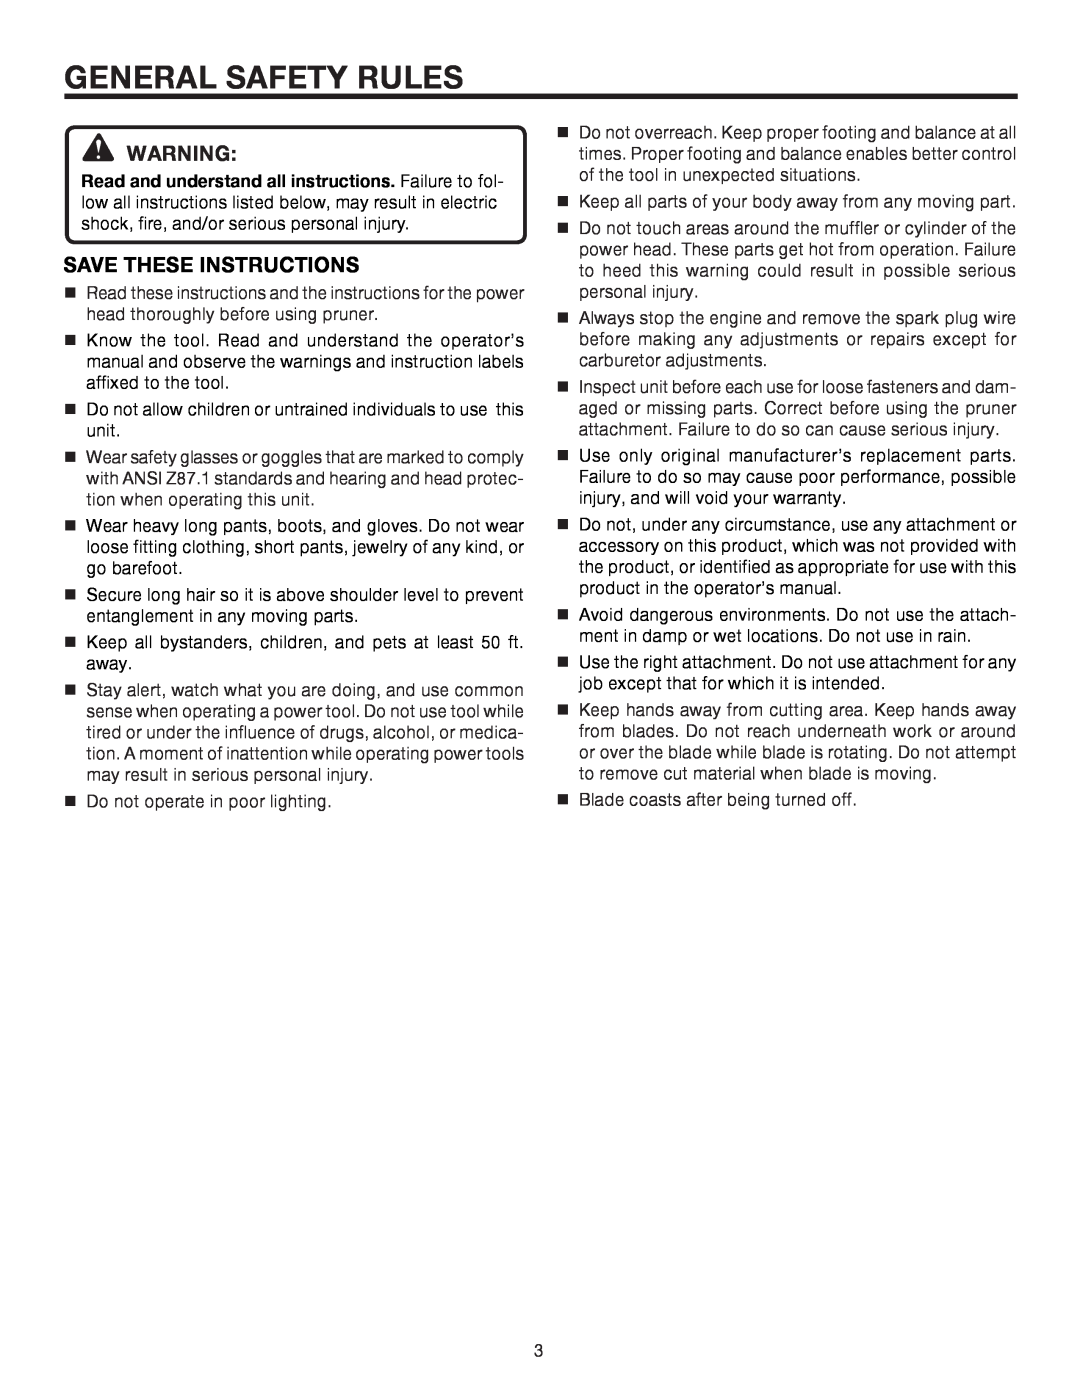 Ryobi UT15520C manual General Safety Rules, Save These Instructions 